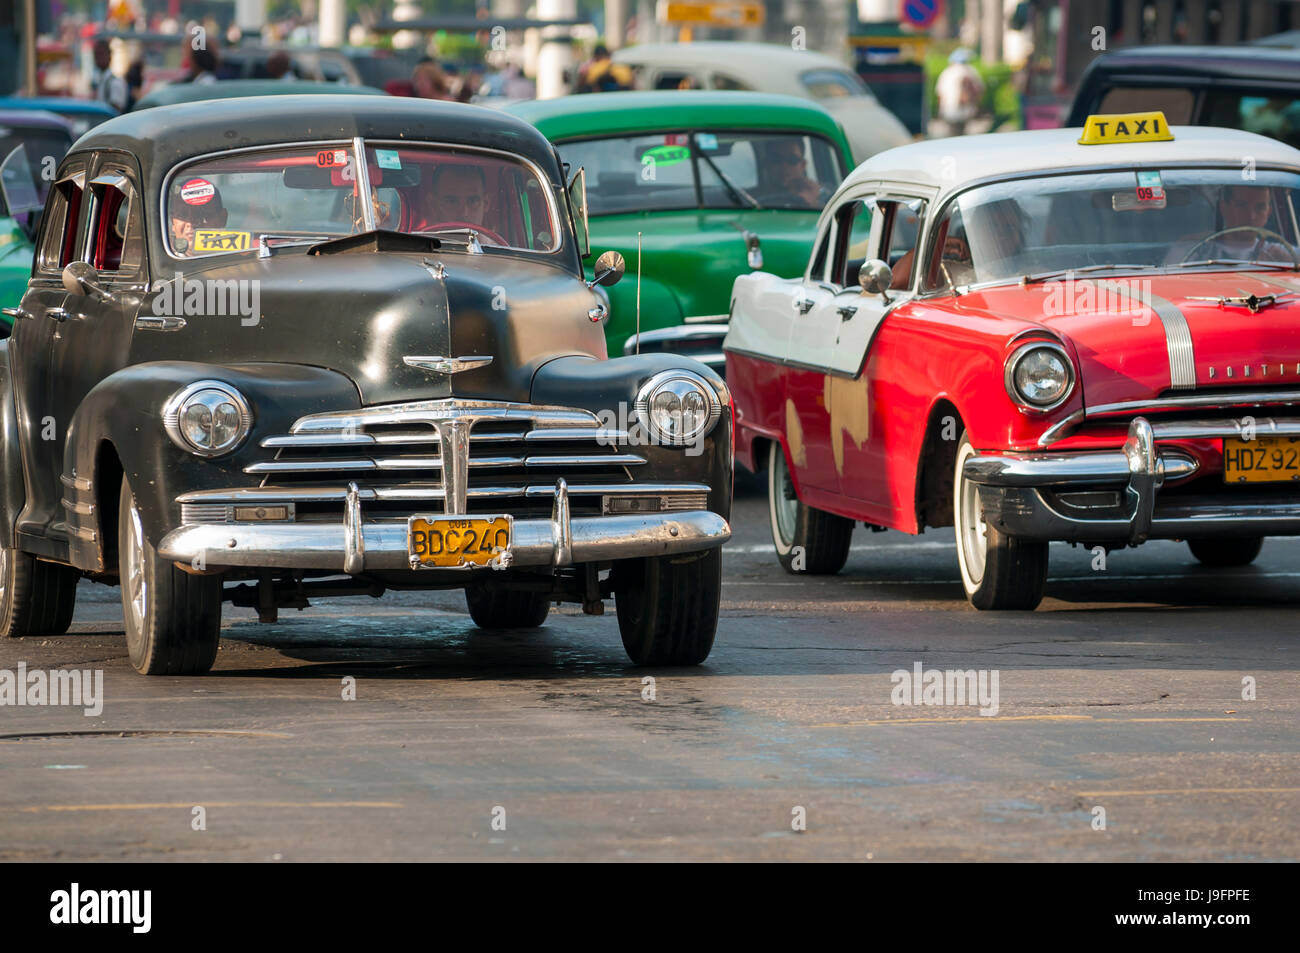 HAVANA, CUBA - CIRCA JUNE, 2011: Vintage American taxi cars share the road on a street in Centro. Stock Photo